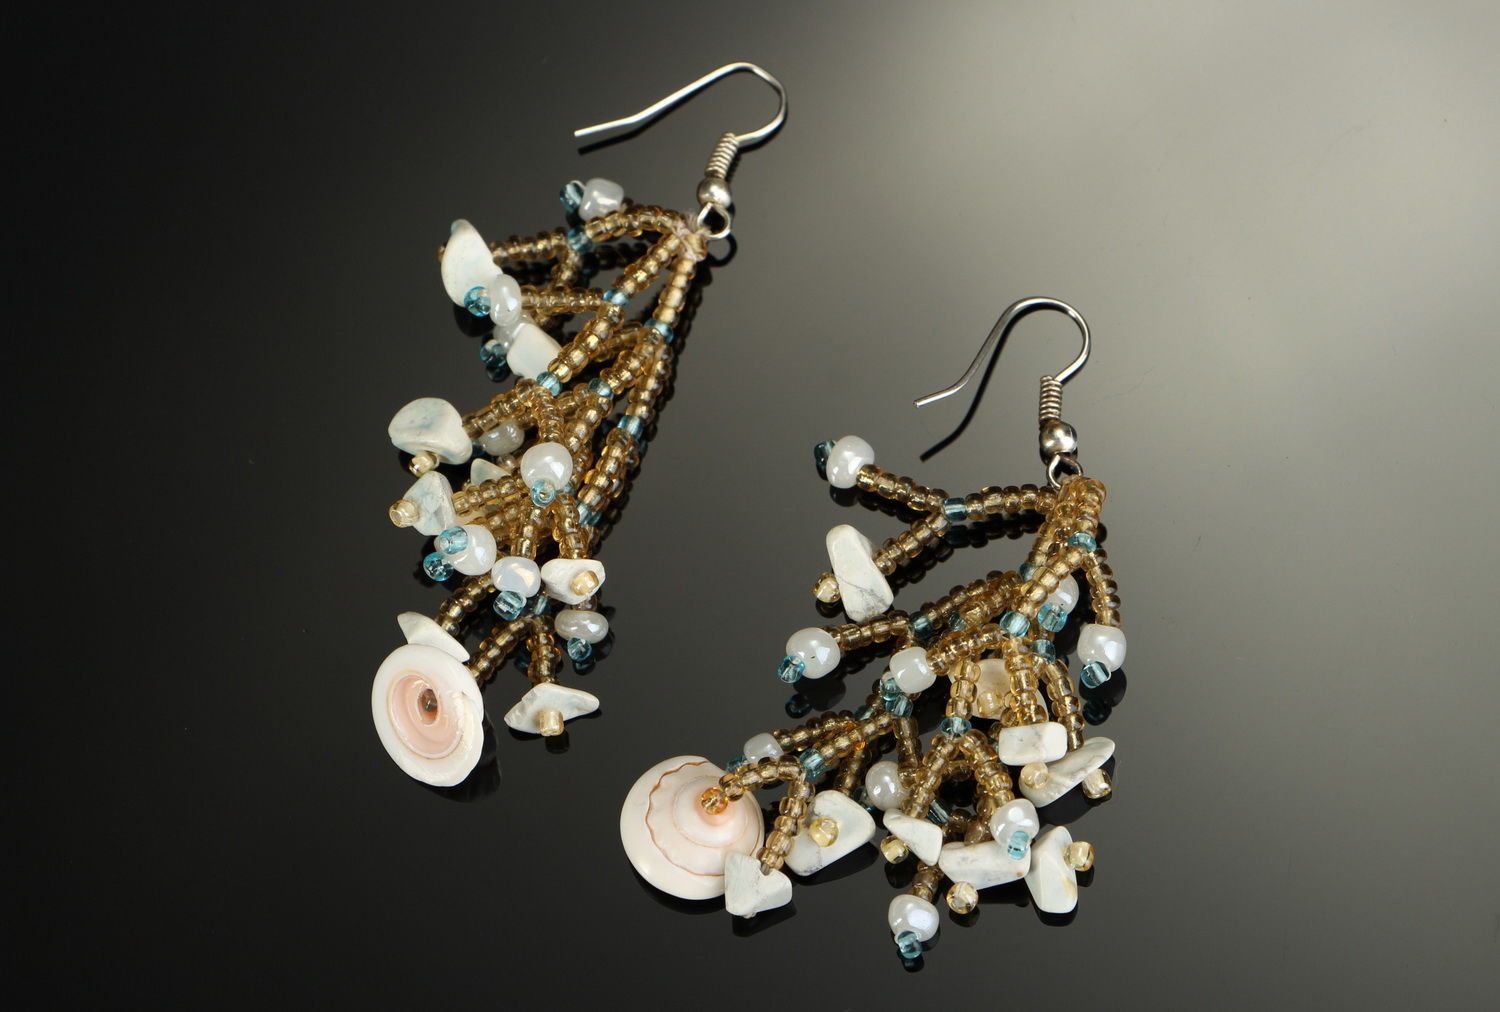 Earrings made of beads, turquoise and seashells photo 1